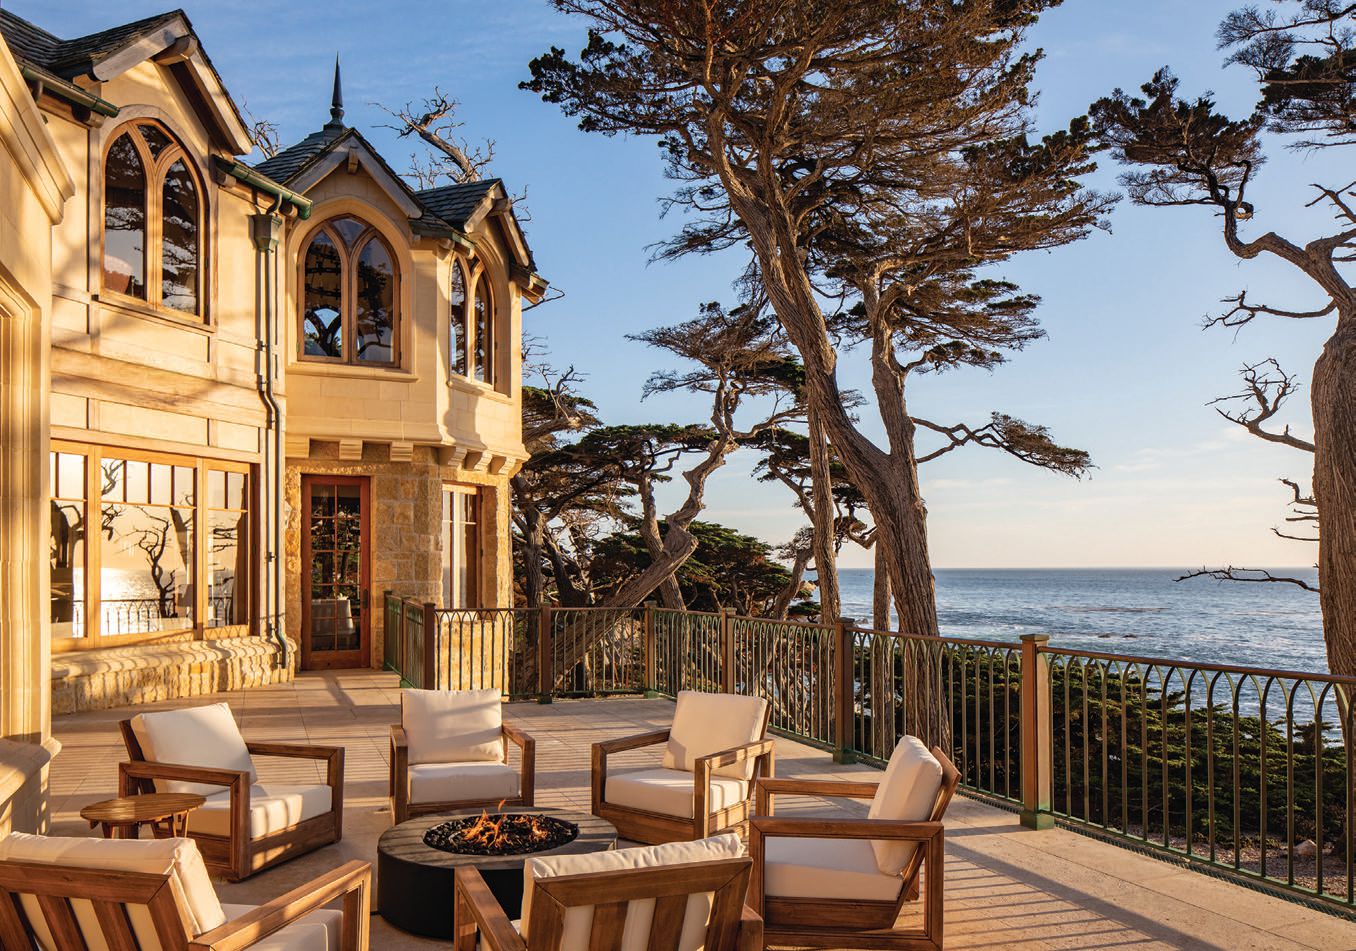 The property offers staggering waterfront views PHOTO BY SHERMAN CHU & RYAN ROSENE/COURTESY OF CARMEL REALTY COMPANY